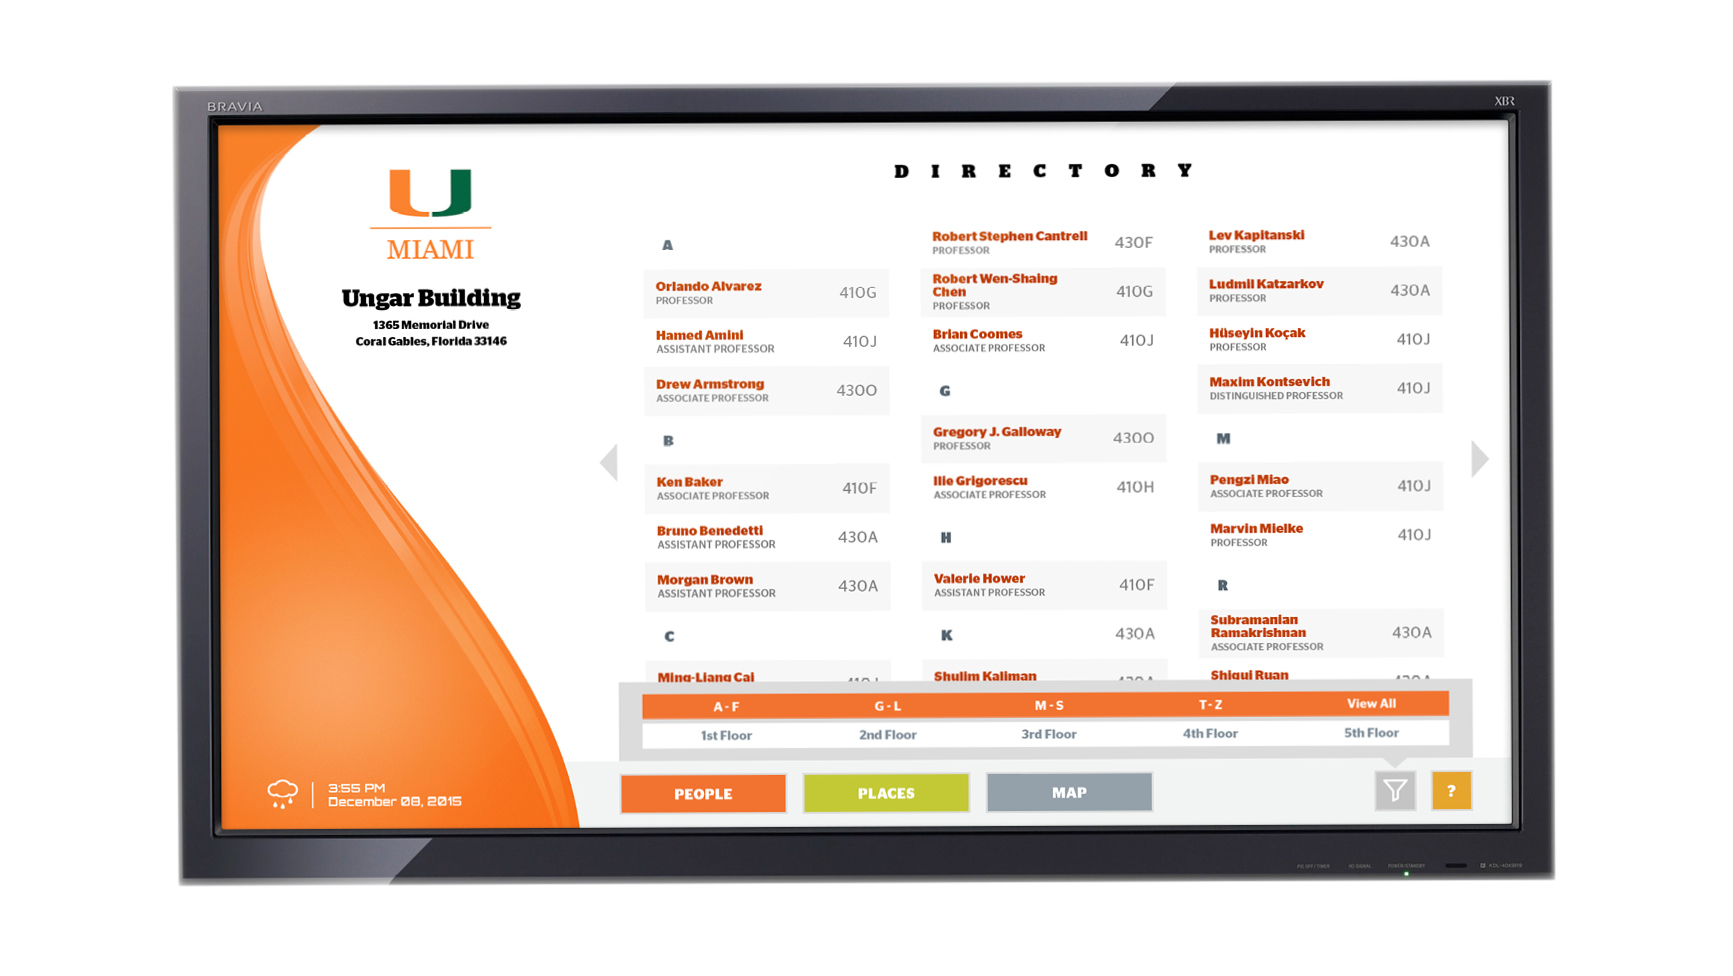 University of Miami Campus Directory People Search